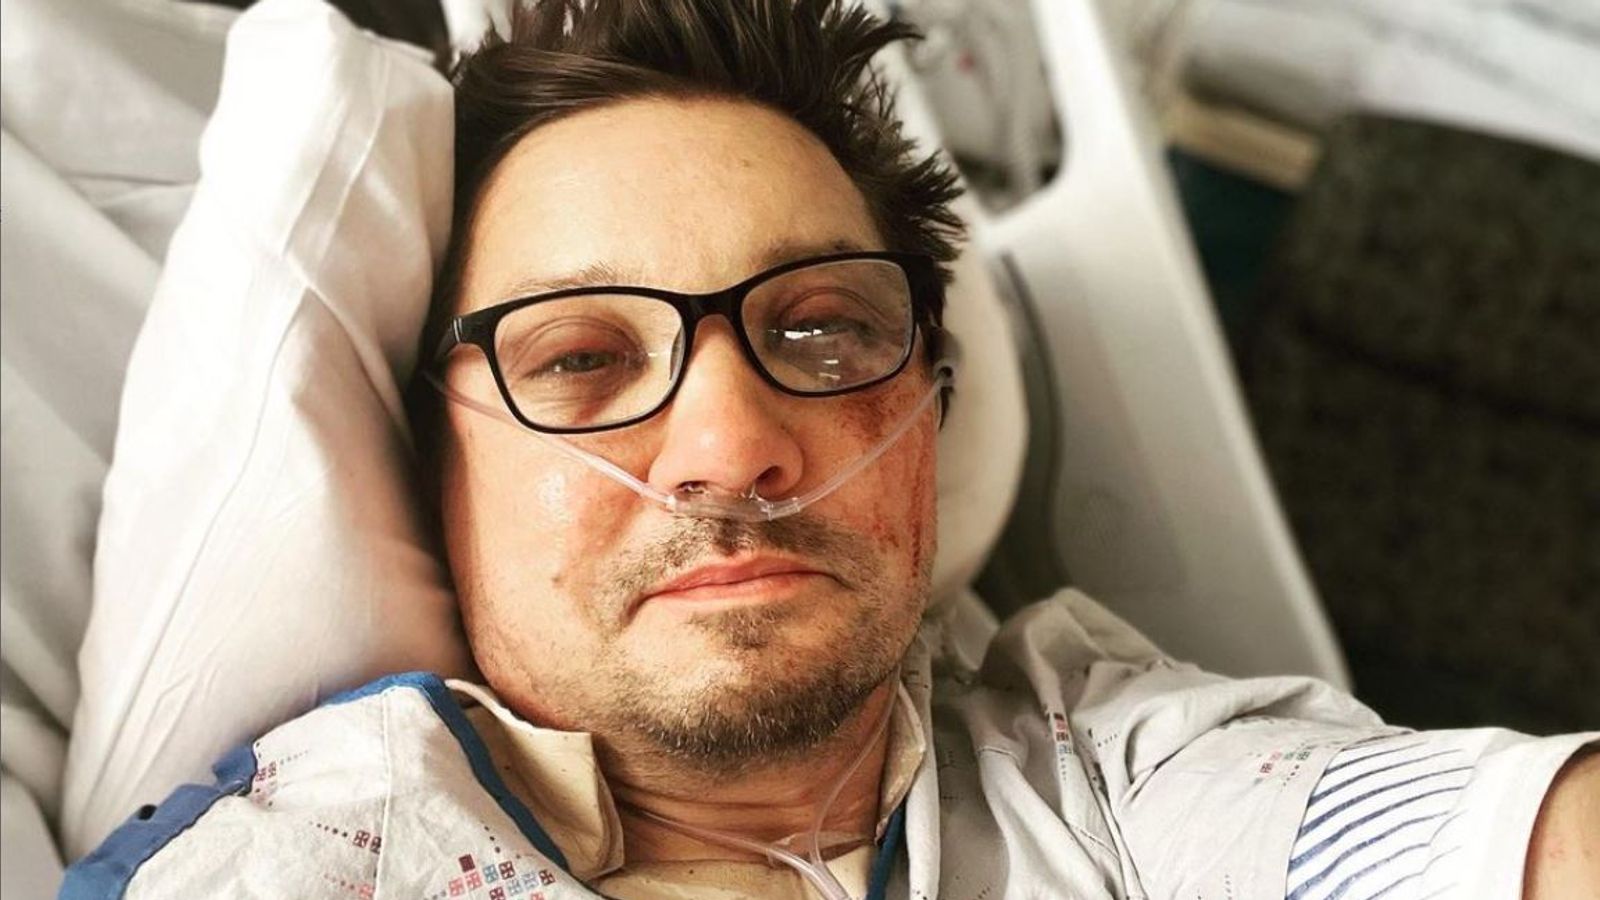 'Excited' Jeremy Renner shares image of new show which will be out 'as soon as I'm back on my feet' after snow plough accident